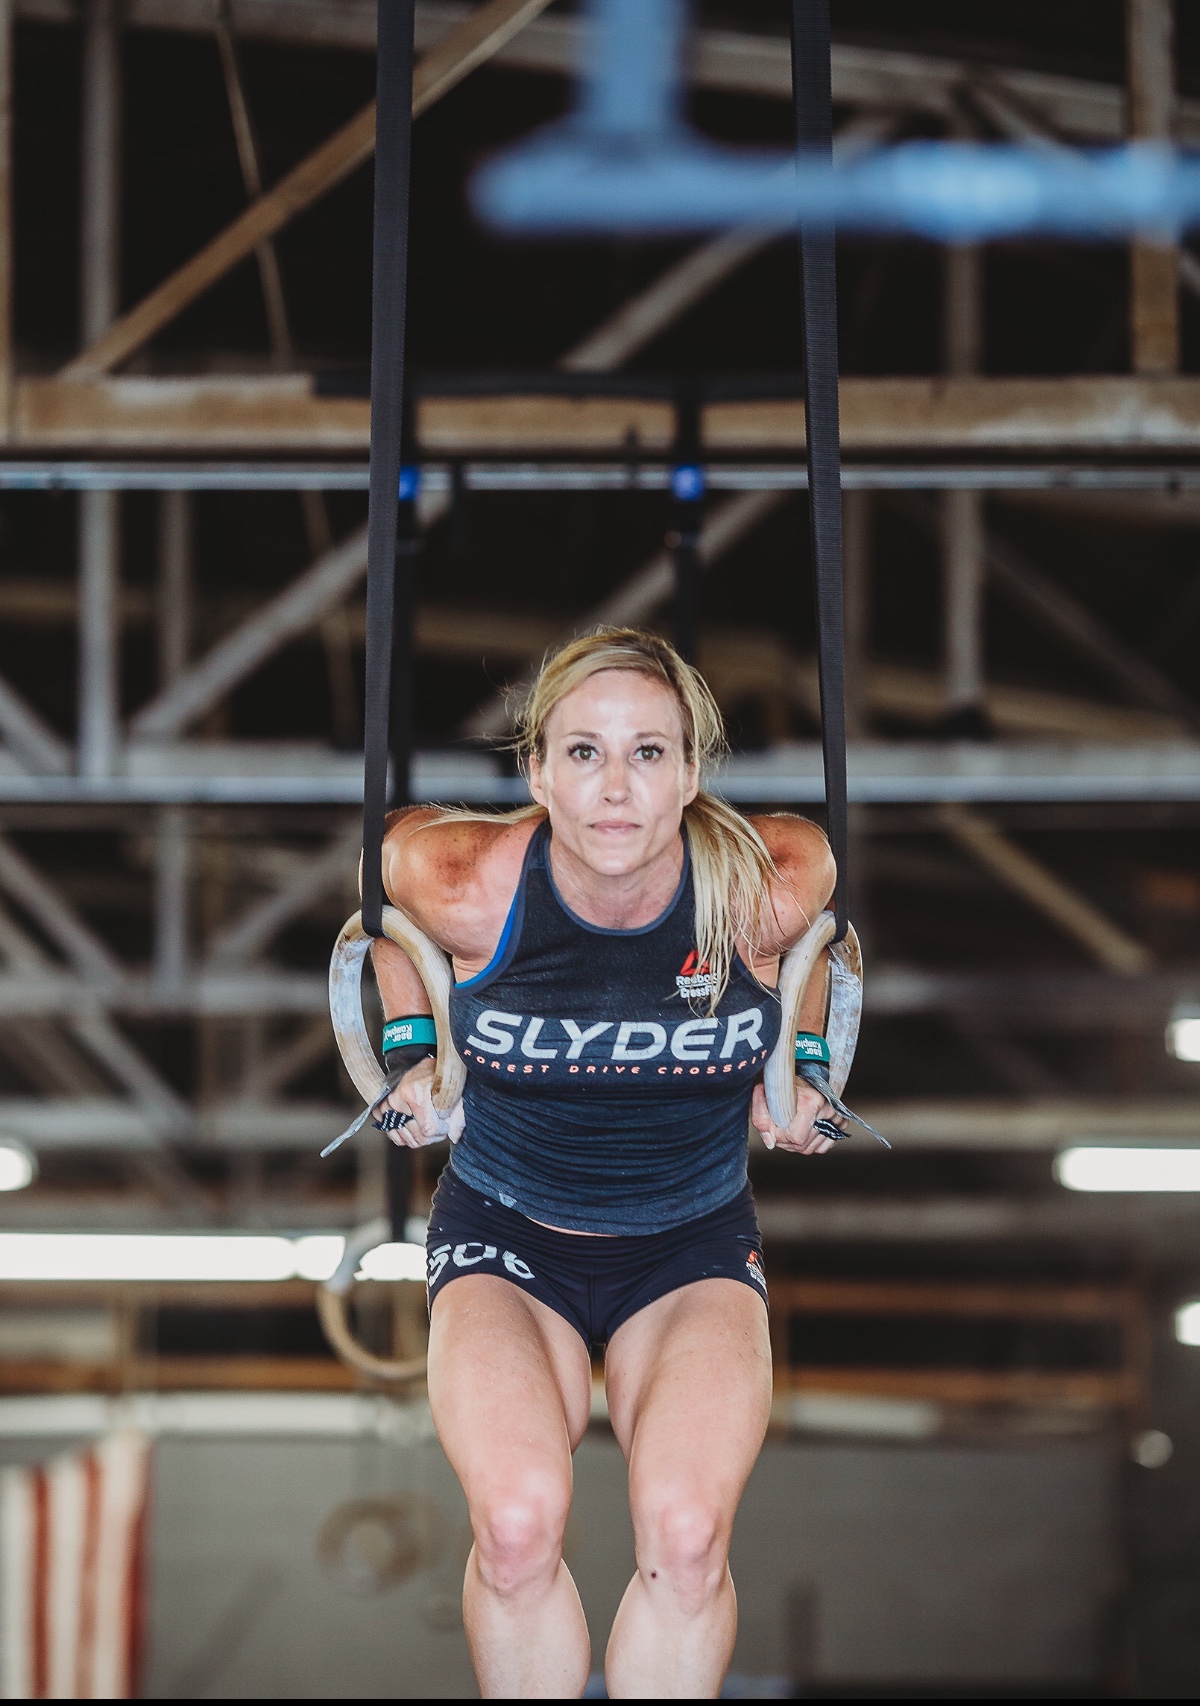 Jana credits her father, J.D. Green, for recognizing and cultivating her gifts. However, her husband Matt Slyder, a CrossFit coach and major in the United States Army, nicknamed her “Cinderella Fire Breather” because of her strict bedtime and physical intensity.